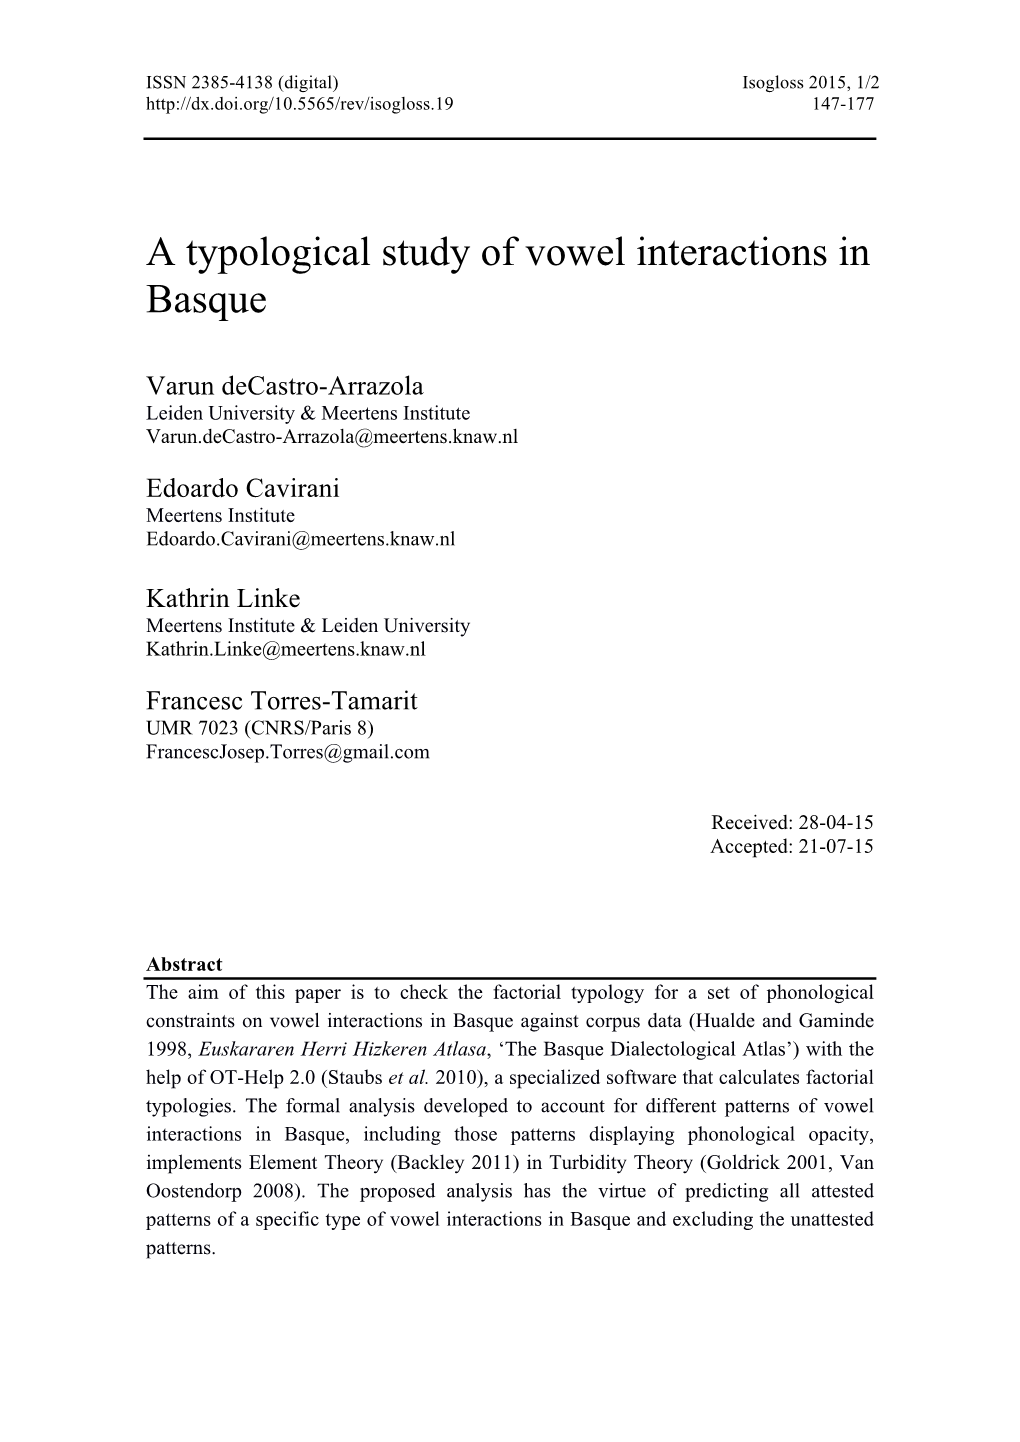 A Typological Study of Vowel Interactions in Basque